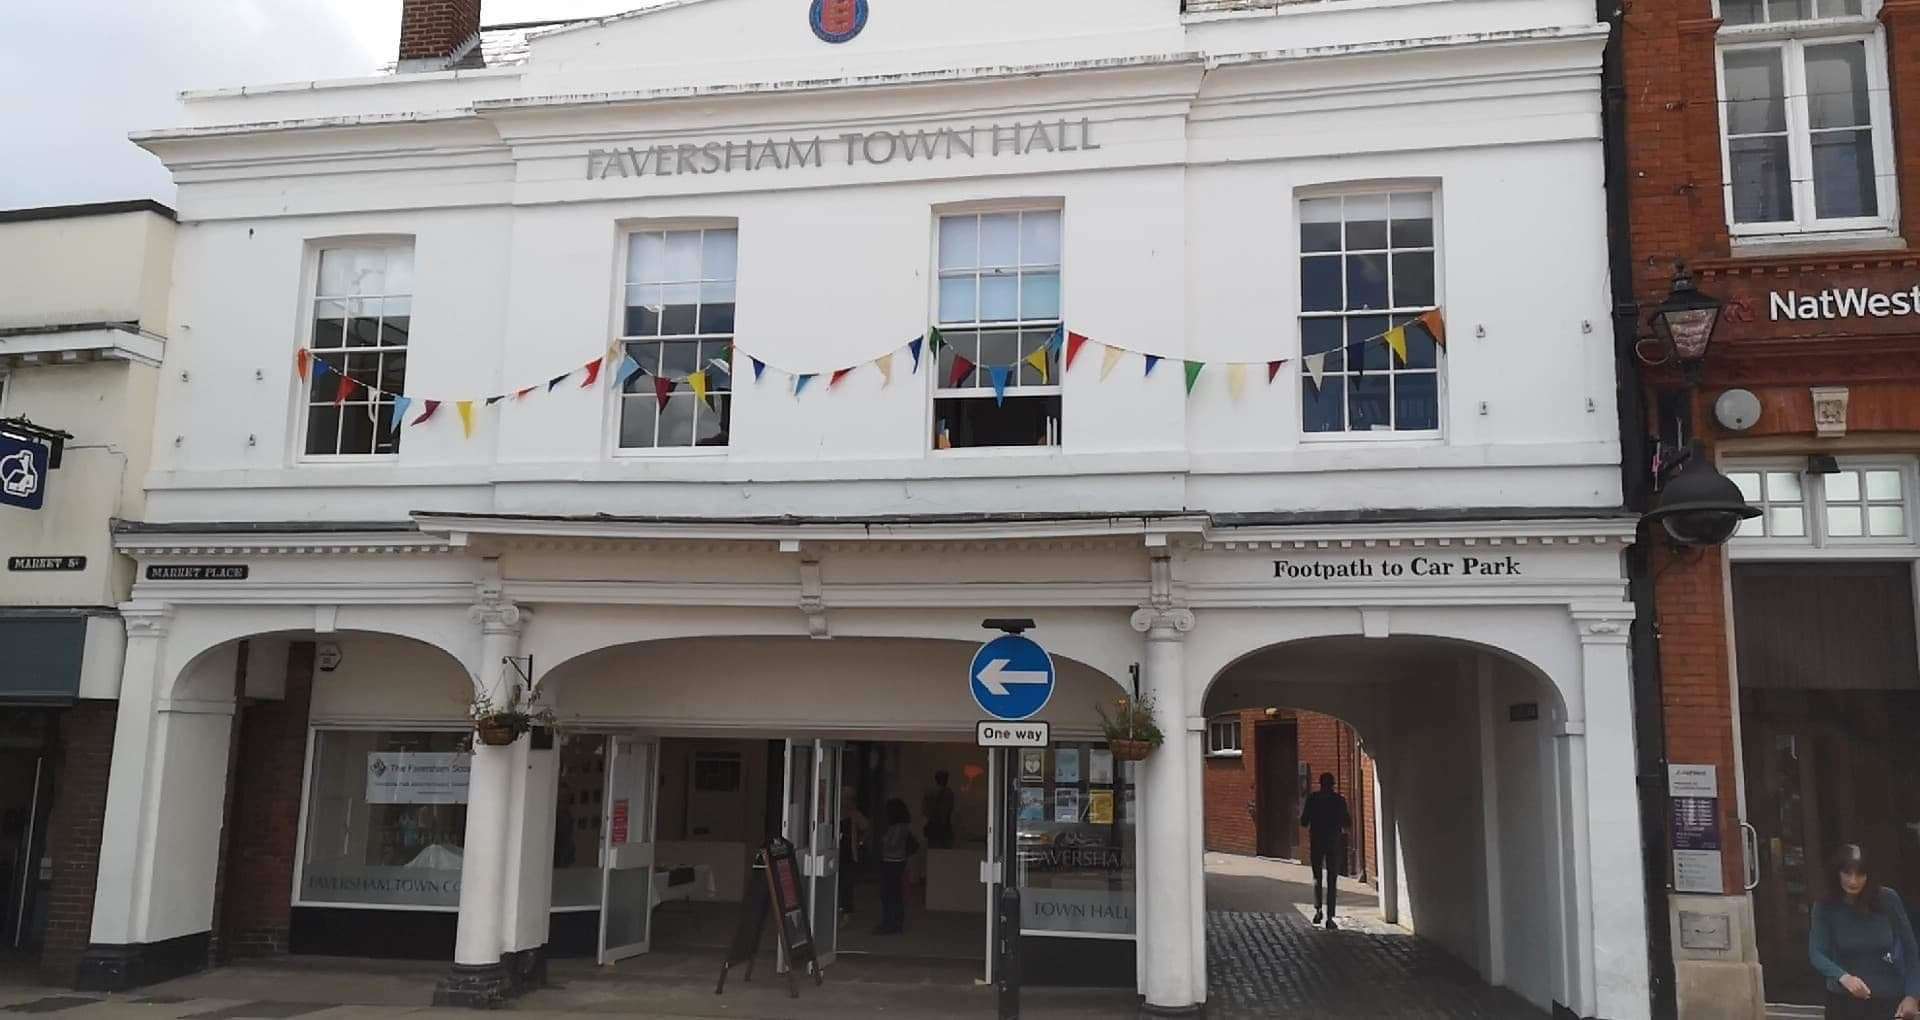 Faversham Town Council secured funding for the project